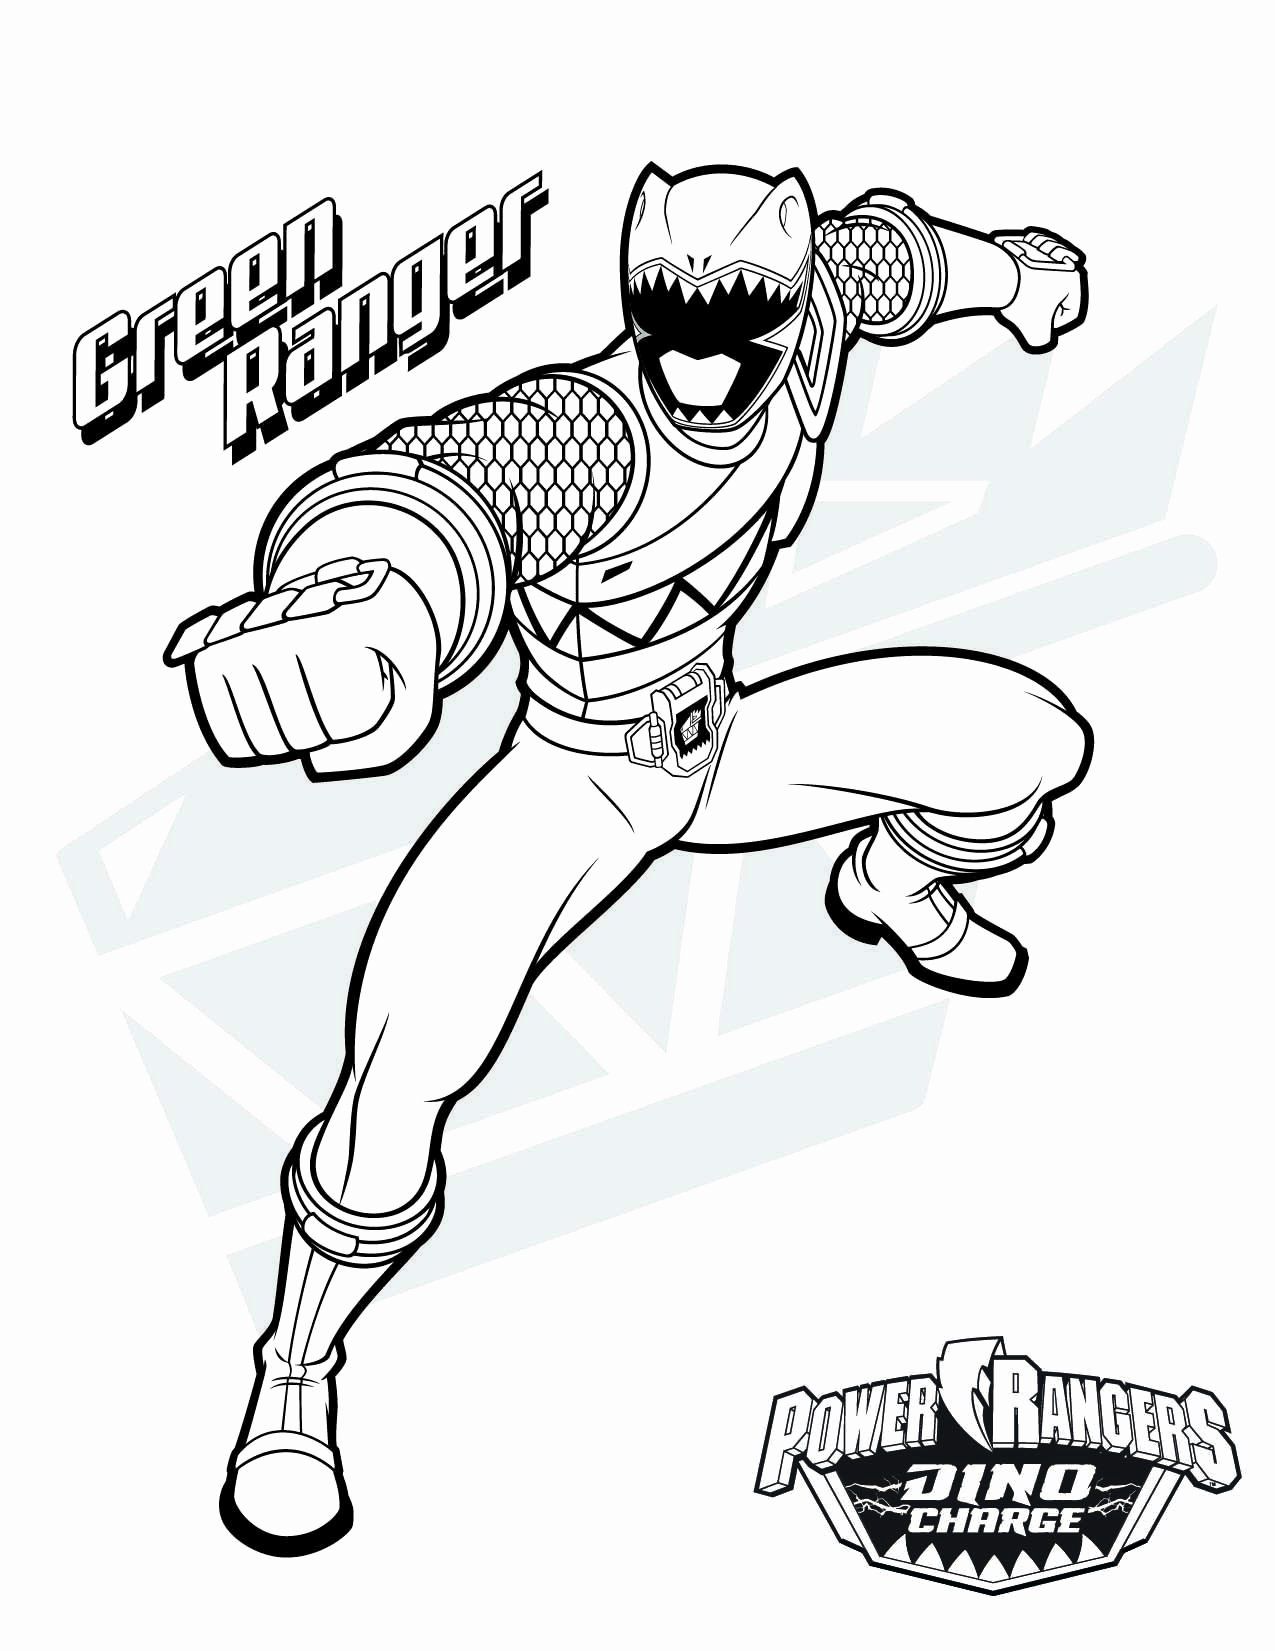 Red Power Ranger Coloring Page Awesome Pin by Power Rangers On Power  Rangers Coloring Page… in 2020 | Power rangers coloring pages, Power rangers,  Power rangers dino charge